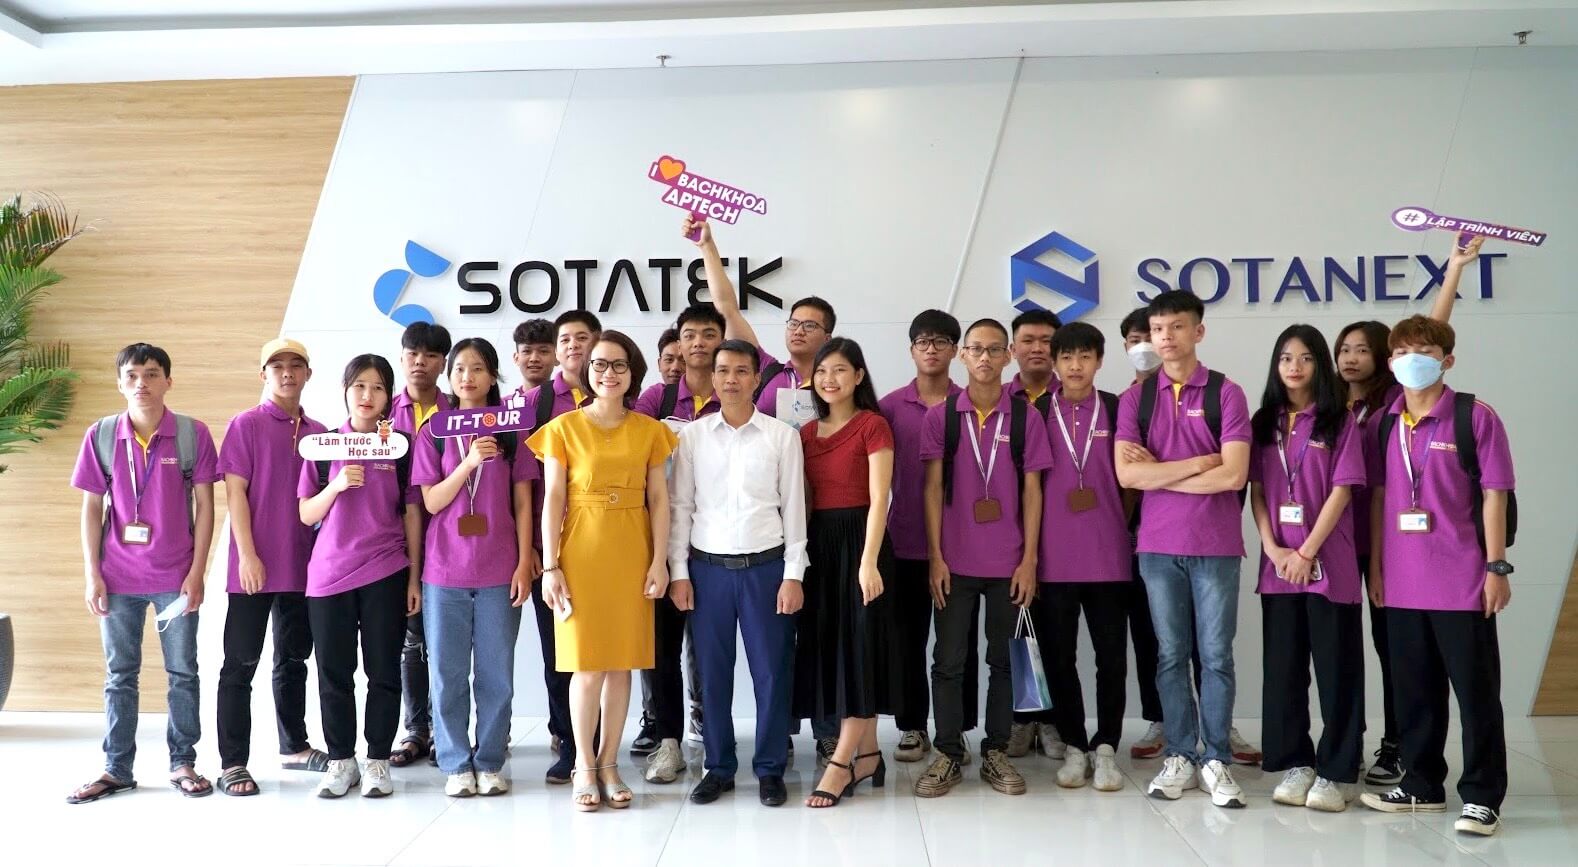 SotaTek Welcomes Students from BachKhoa Aptech to our Office